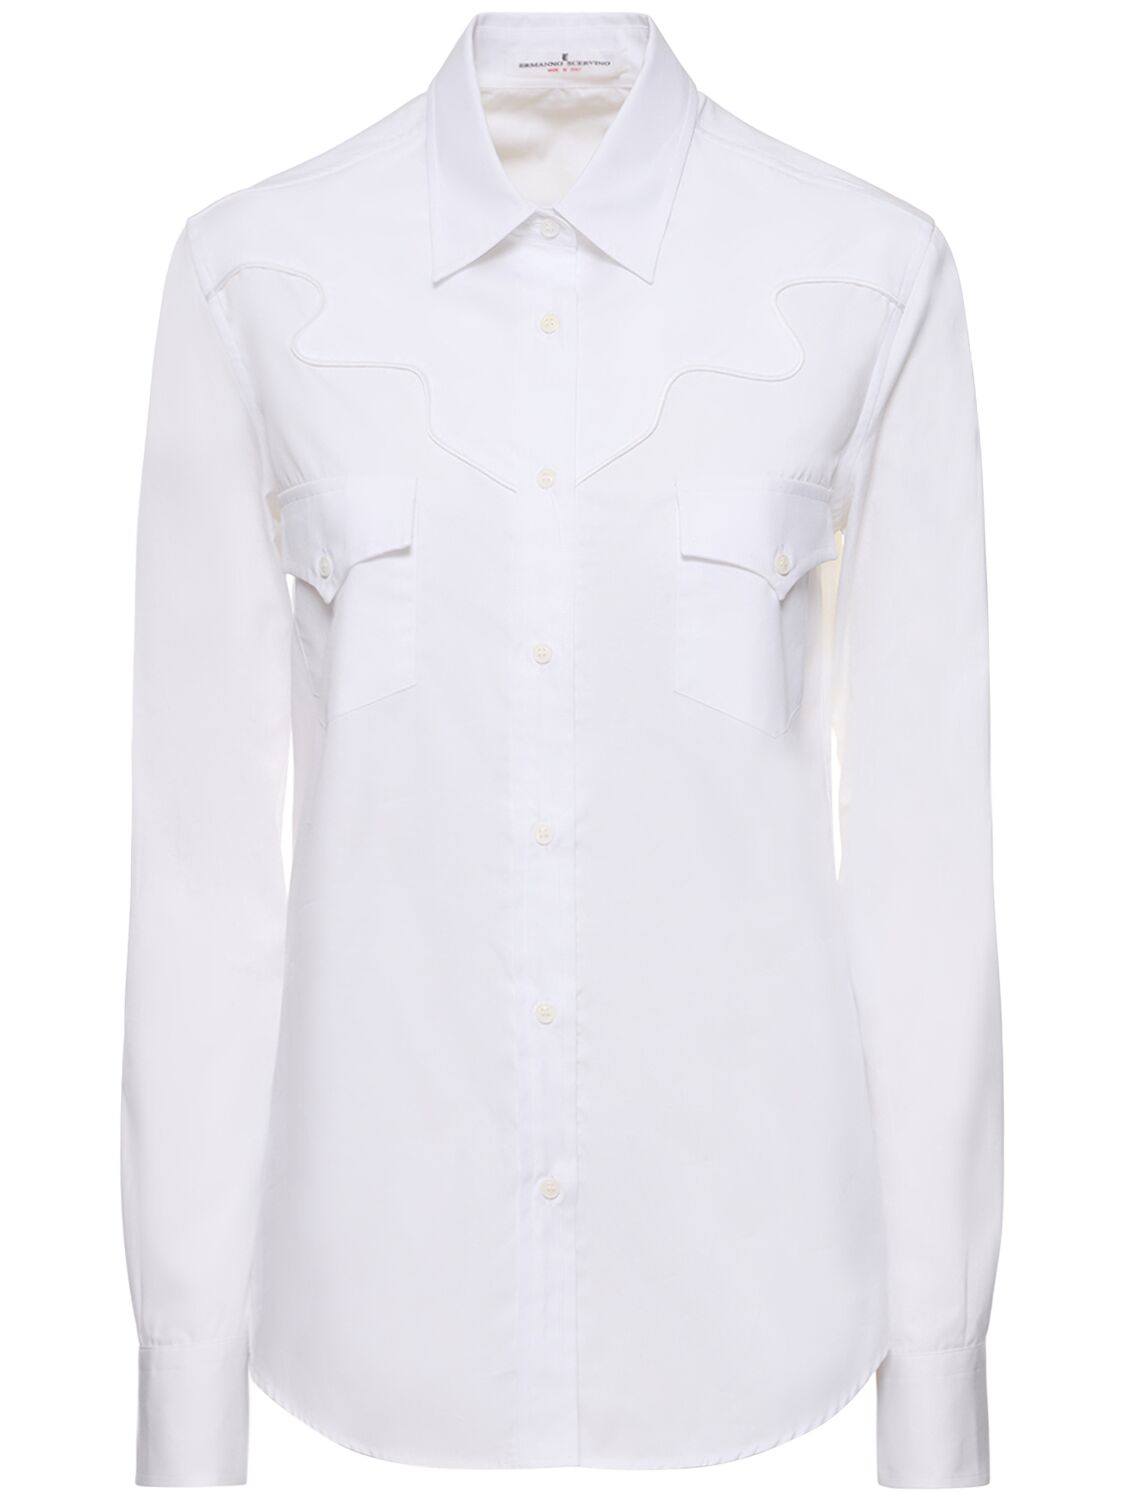 Ermanno Scervino Buttoned Shirt W/ Breast Pockets In White